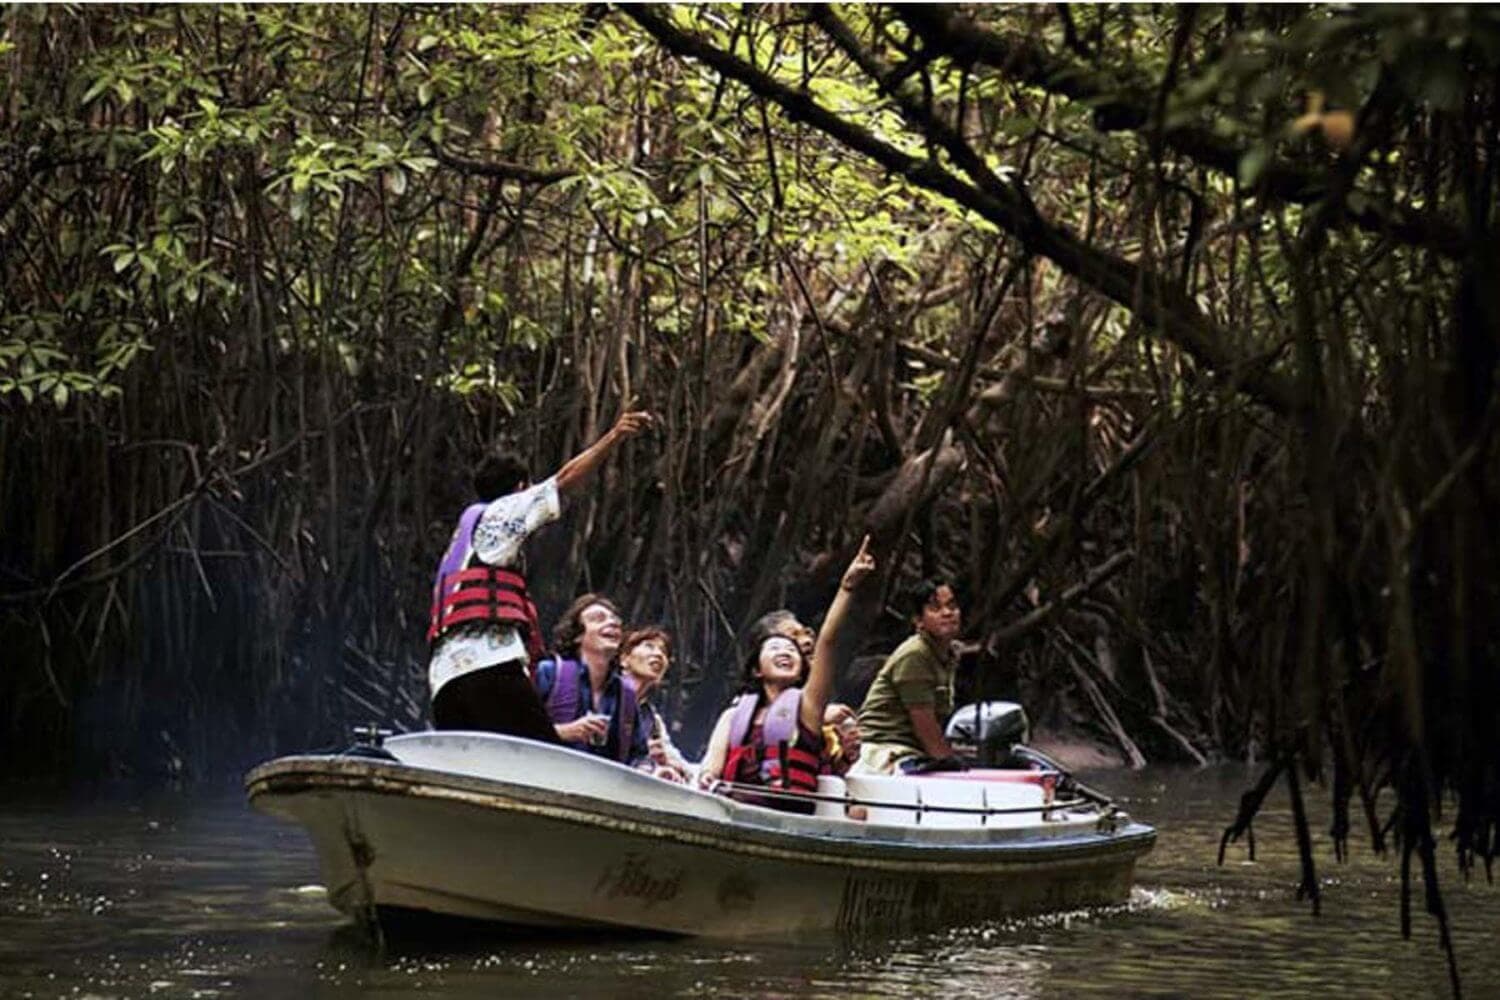 A group of tourists exploring mangrove forests in Bentota Sri Lanka